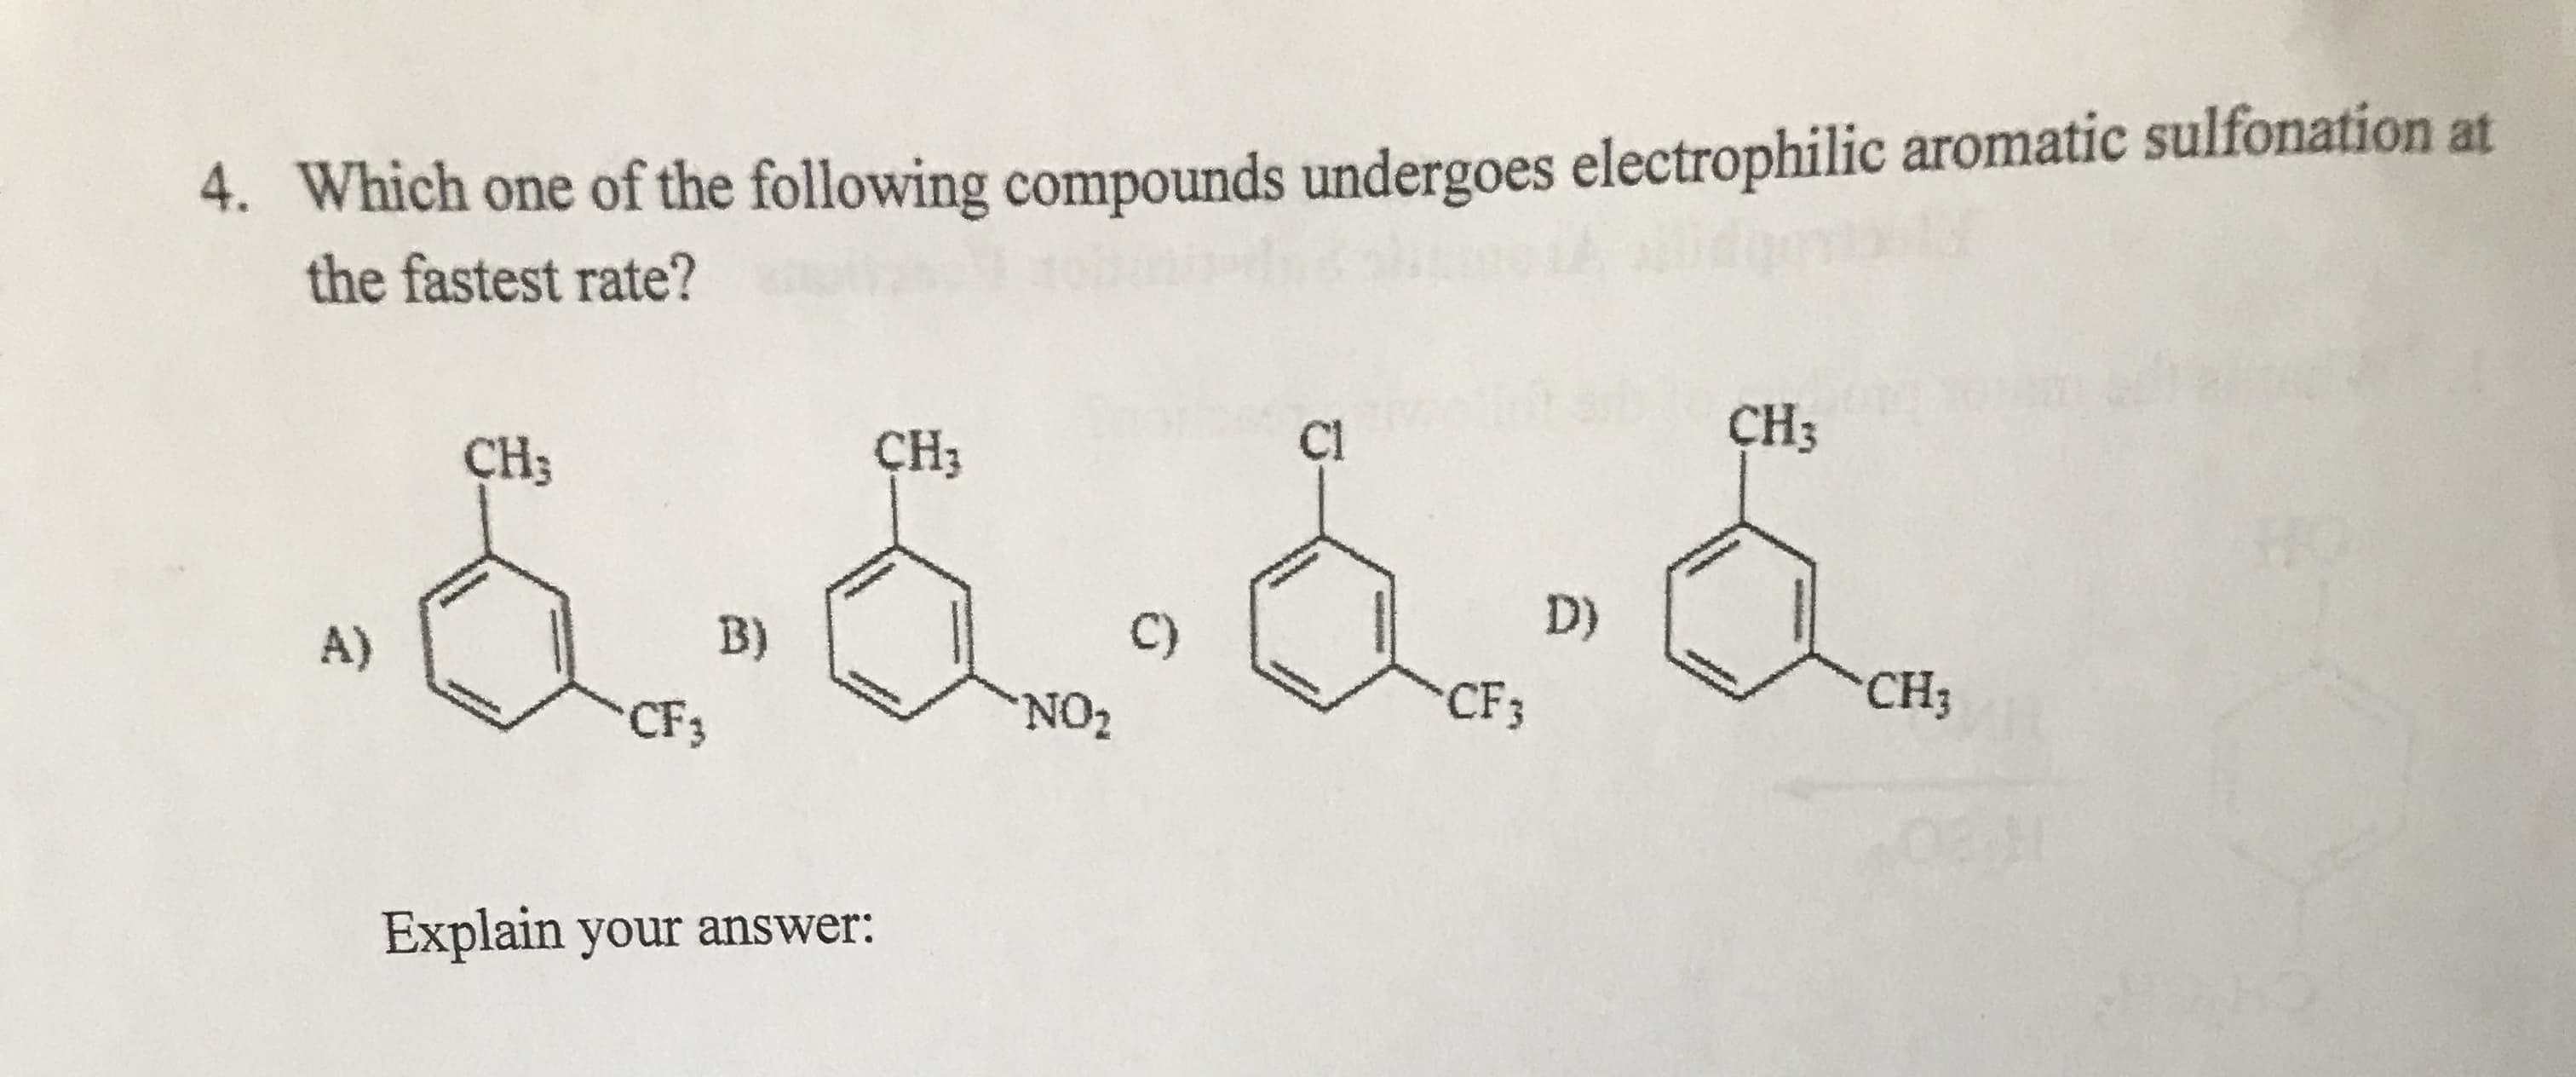 Which one of the following compounds undergoes electrophilic aromatic sulfonation at
the fastest rate?
4.
CH3
C1
CH3
CH3
D)
C)
B)
A)
CH3
CF3
NO2
CF3
Explain your answer:
